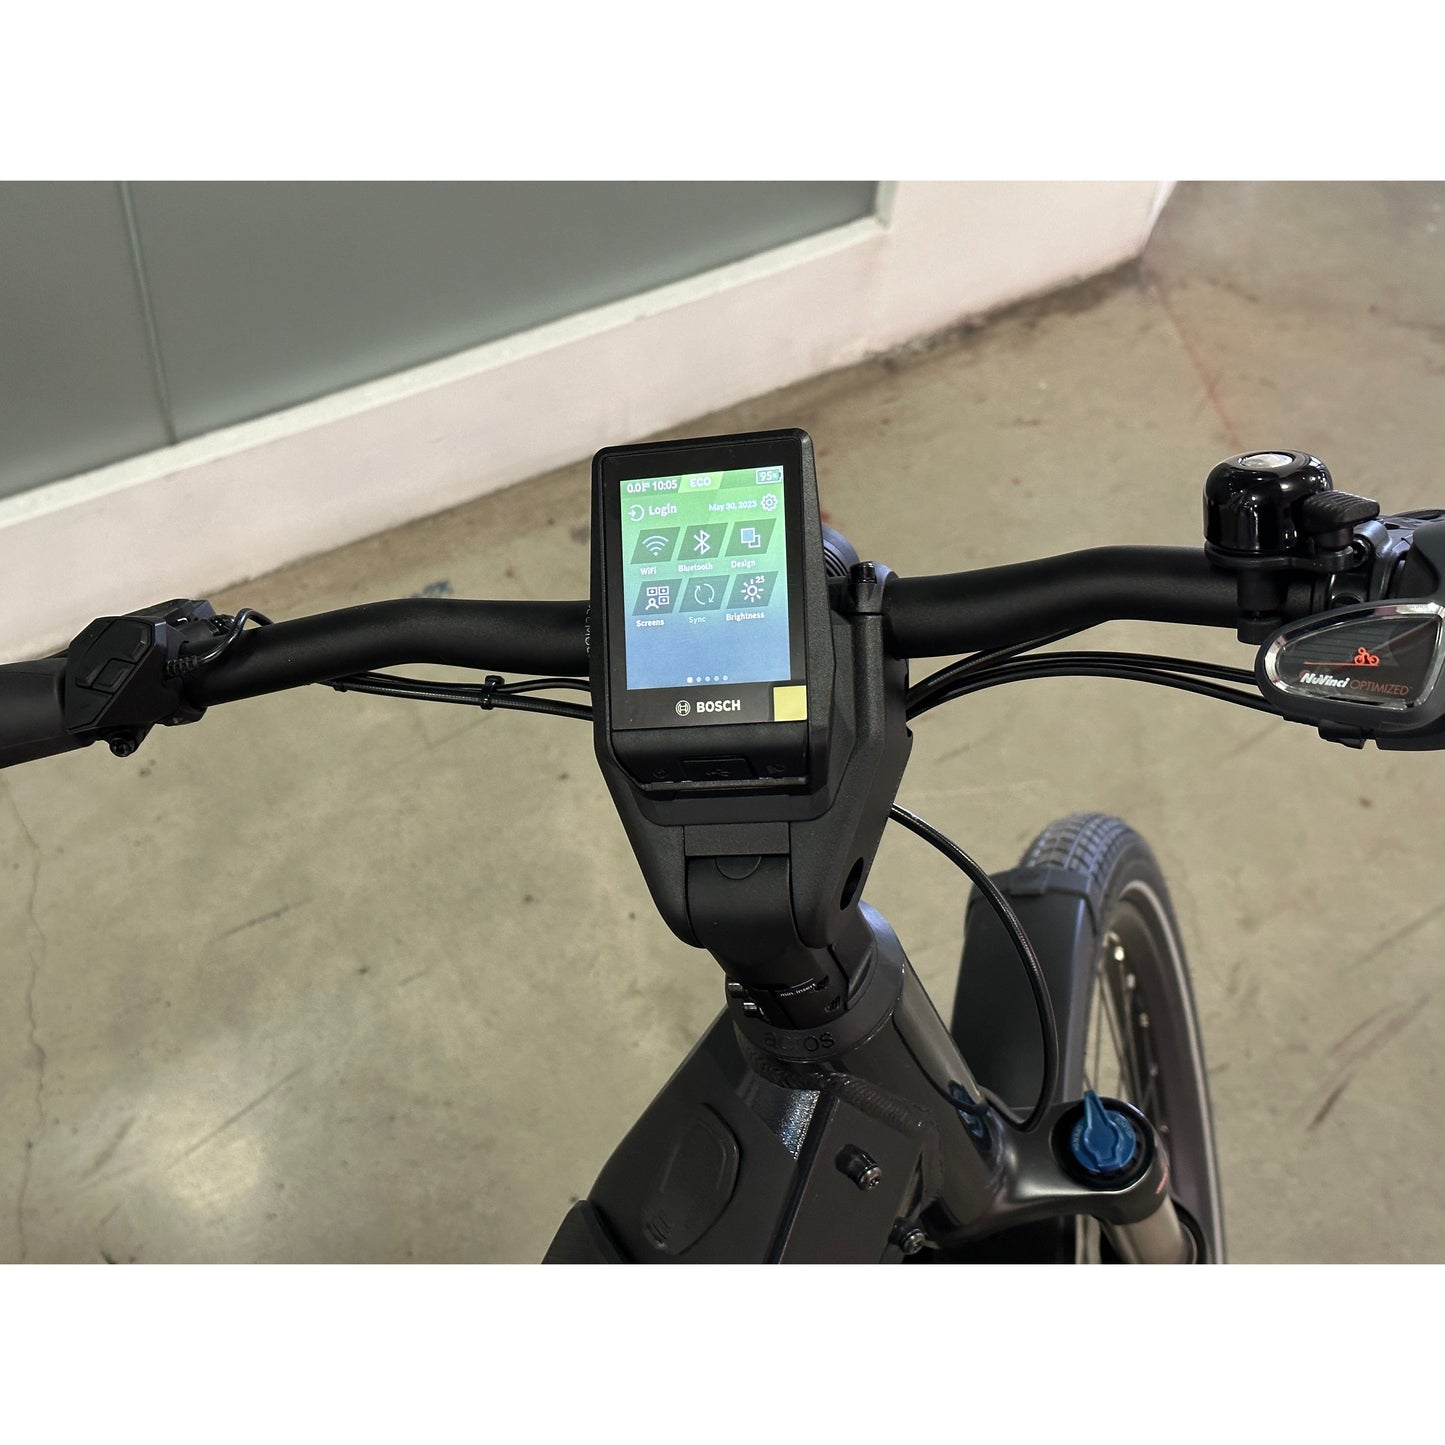 USED - Riese & Muller - Nevo (26") Low Step Through - Power in Motion - Electric Bike - Riese & Muller - Canada - Calgary - Alberta